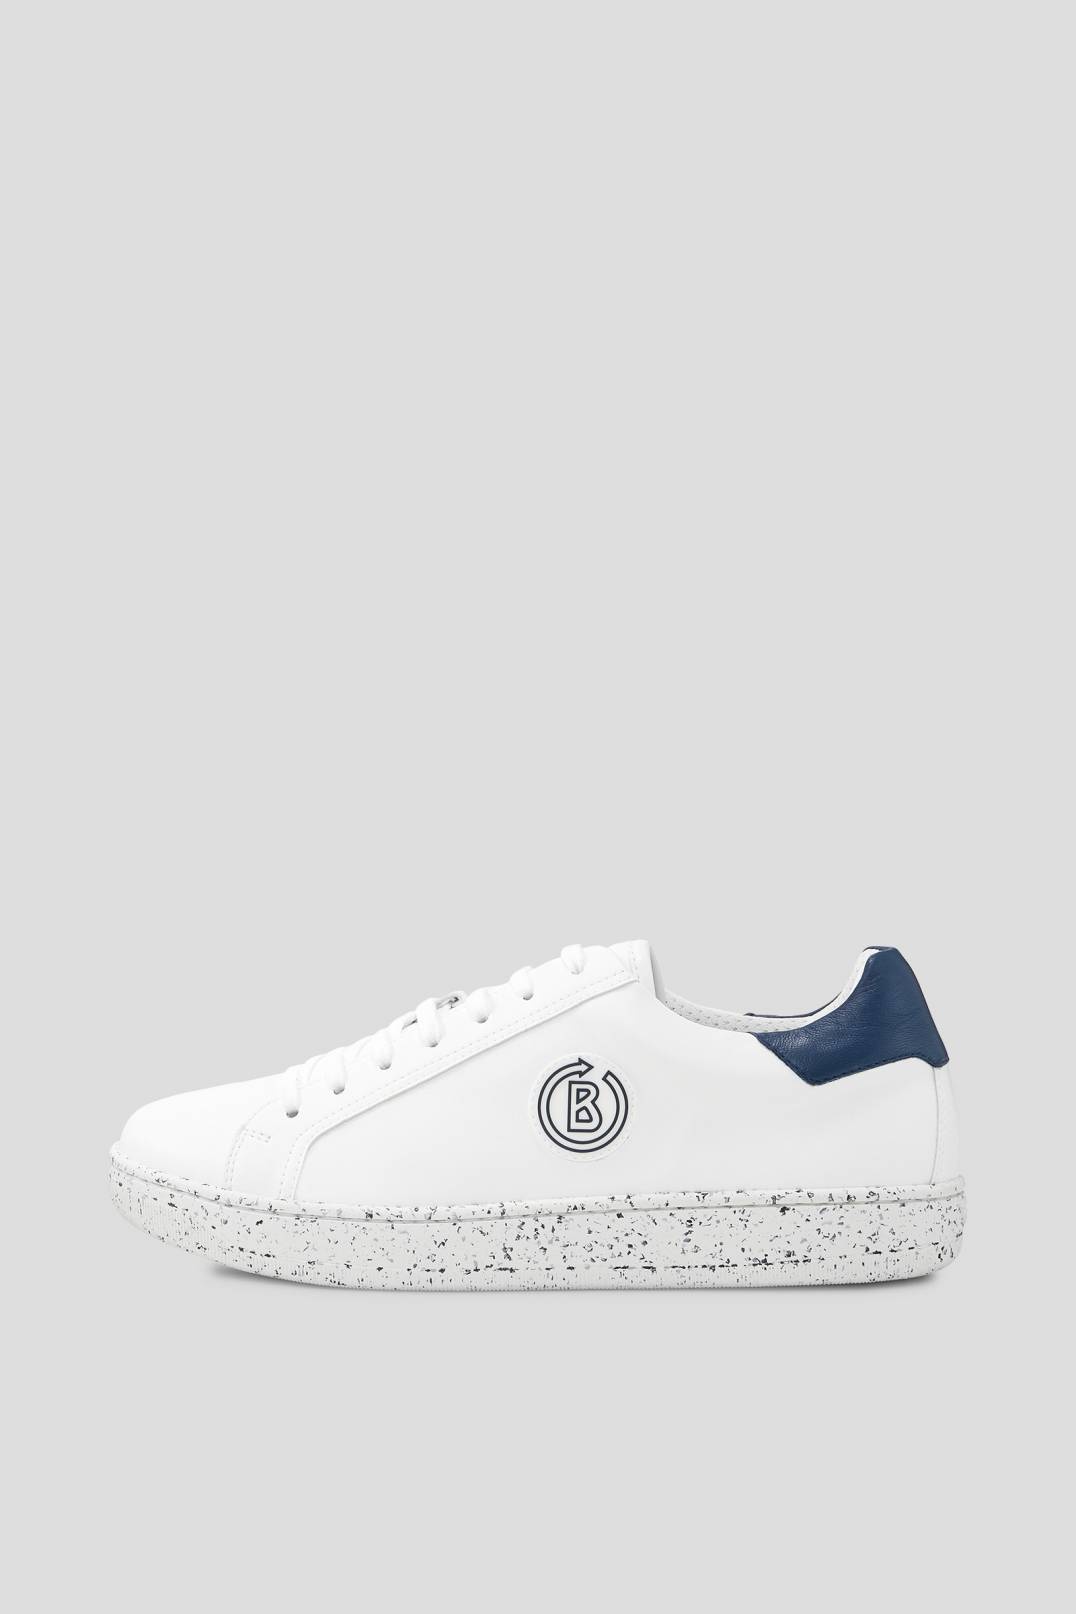 MALMÖ SUSTAINABLE SNEAKERS IN WHITE/NAVY BLUE - 1